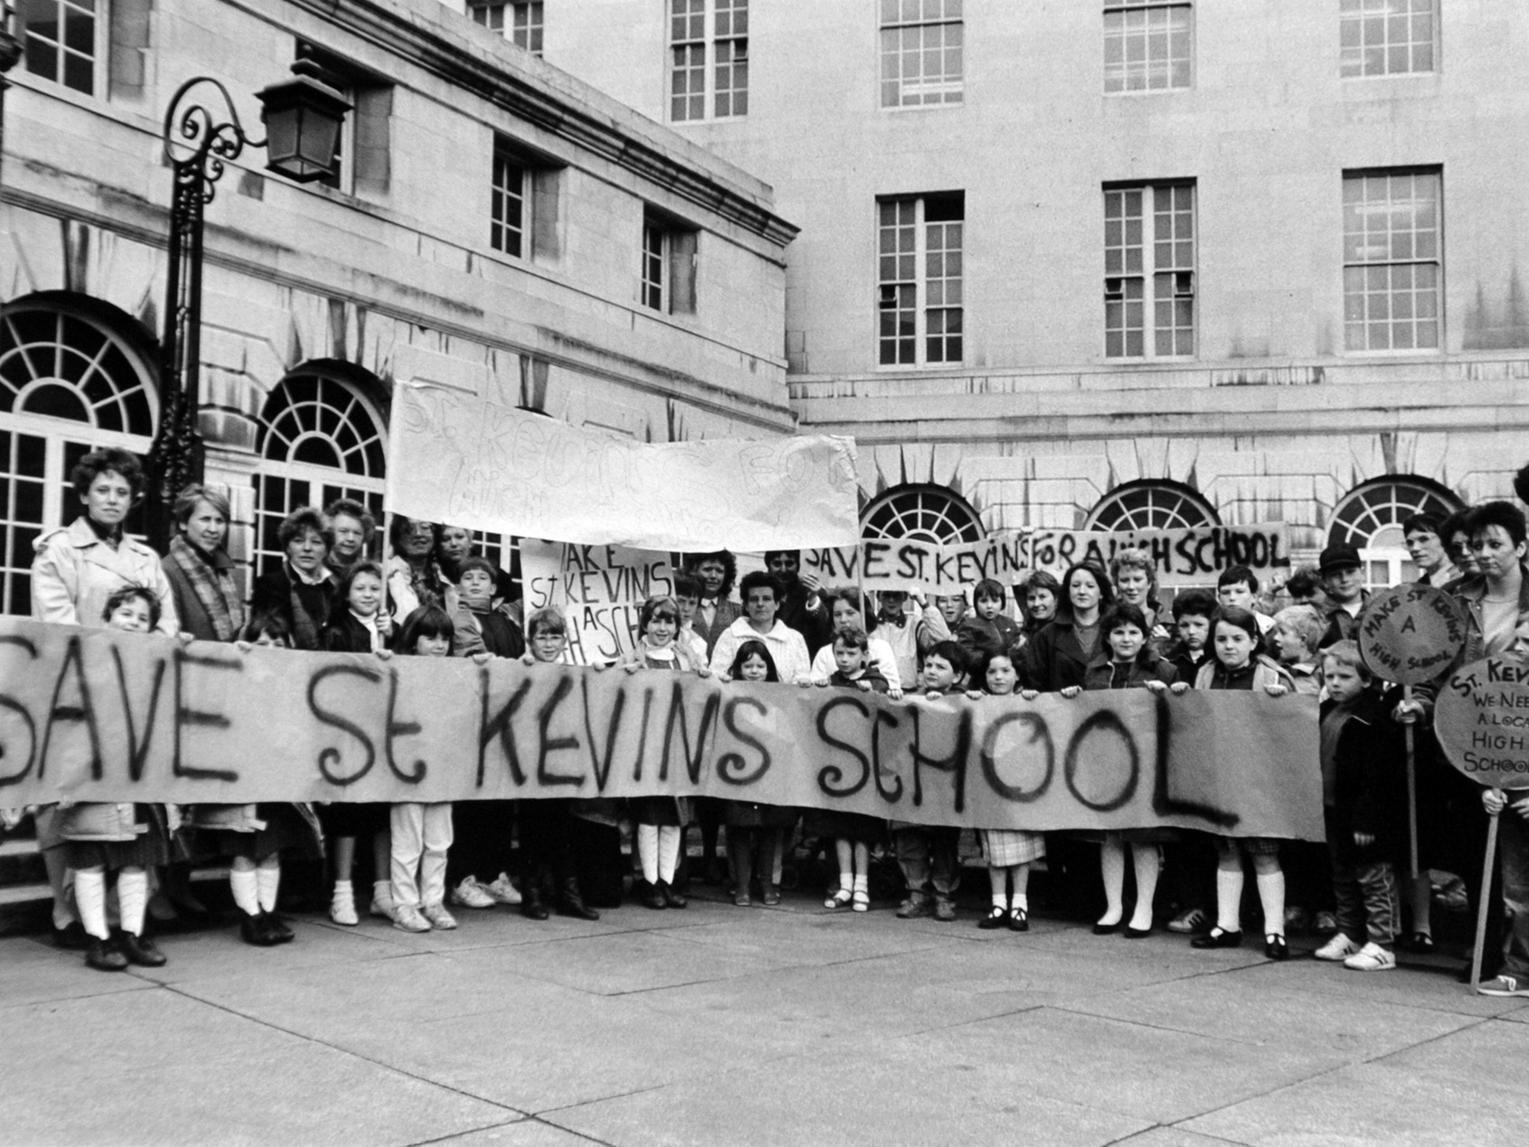 Objectors to the closure of St. Kevin's School on Barwick Road at Manston, outside Leeds Civic Hall.